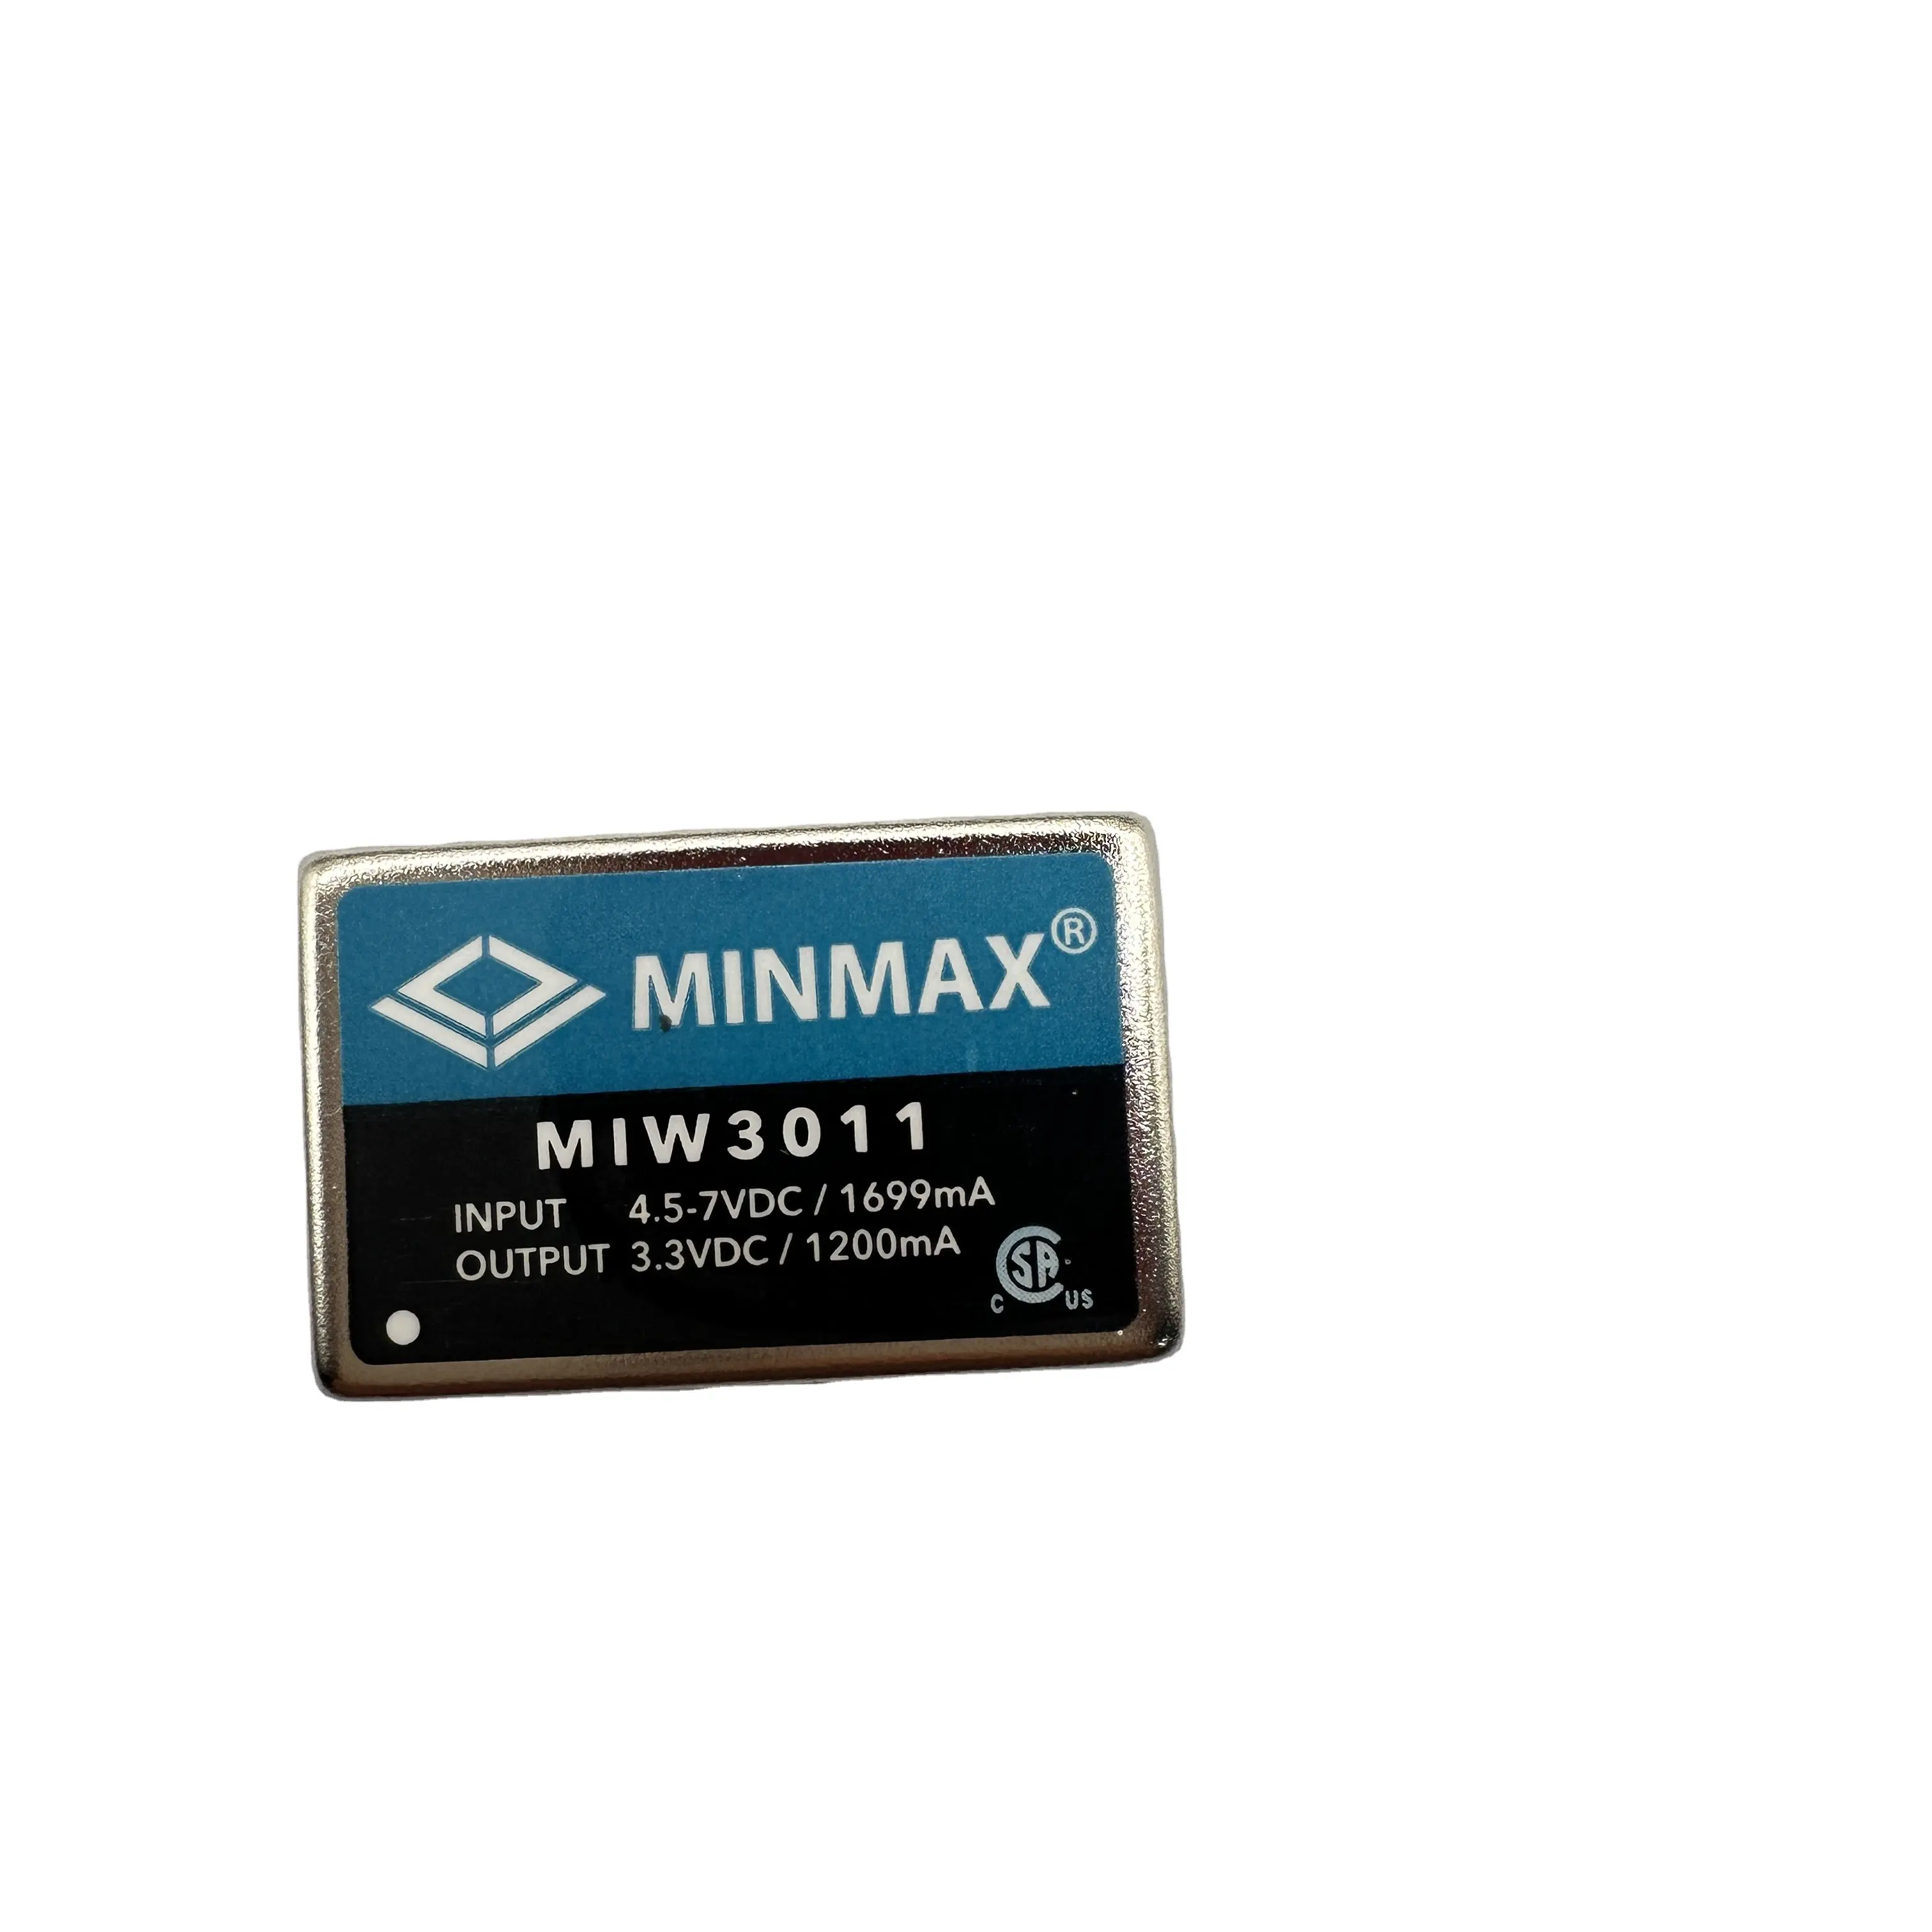 MINMAX BRAND NEW IN STK MIW3011 DIP Single & Dual Output DC/DC Converters